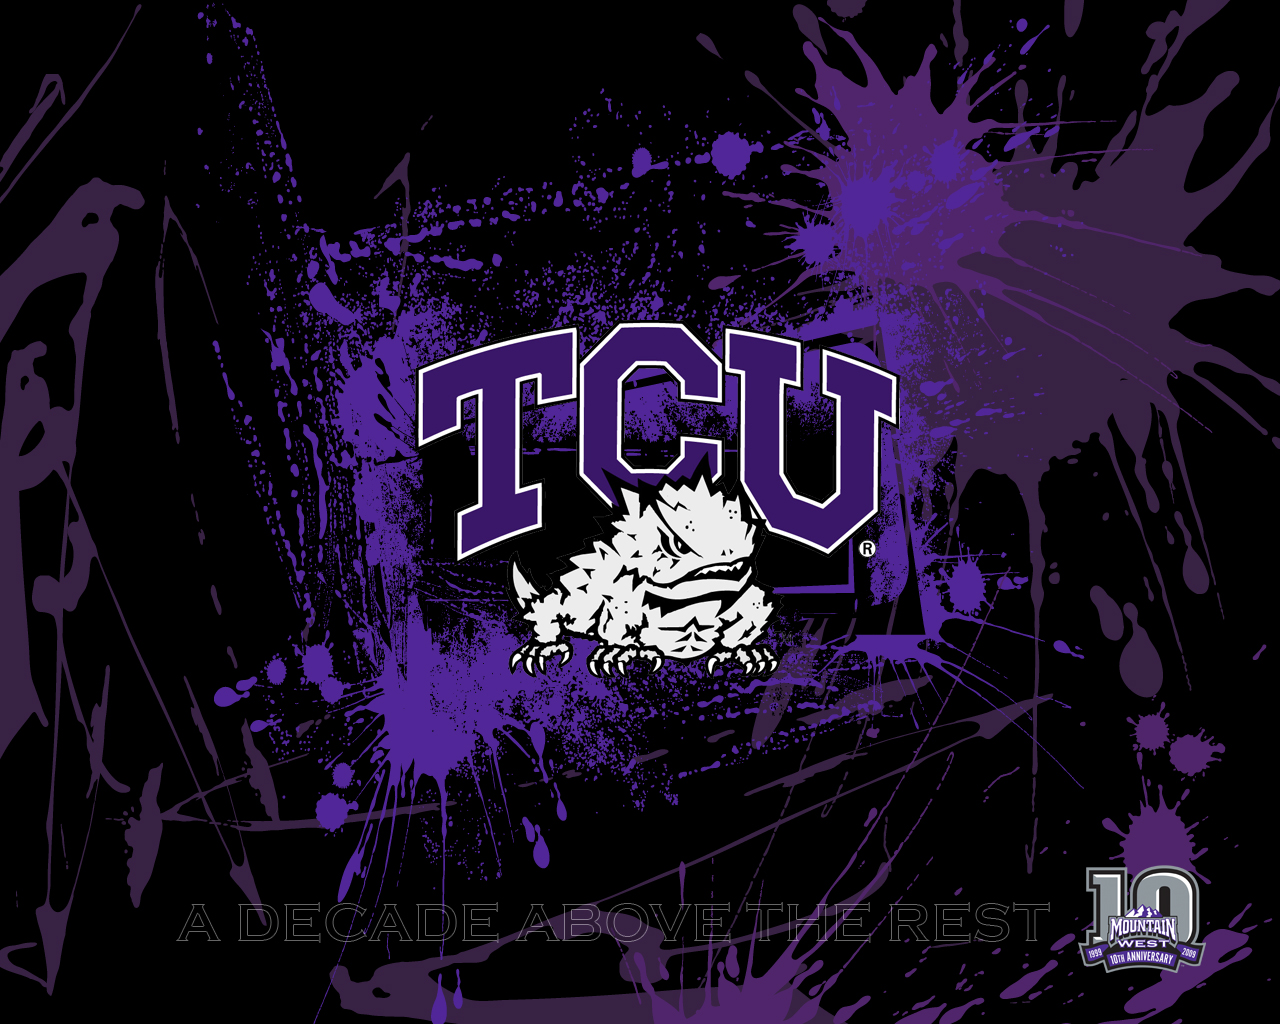 Tcu Football Hq Wallpaper In High Resolution For This